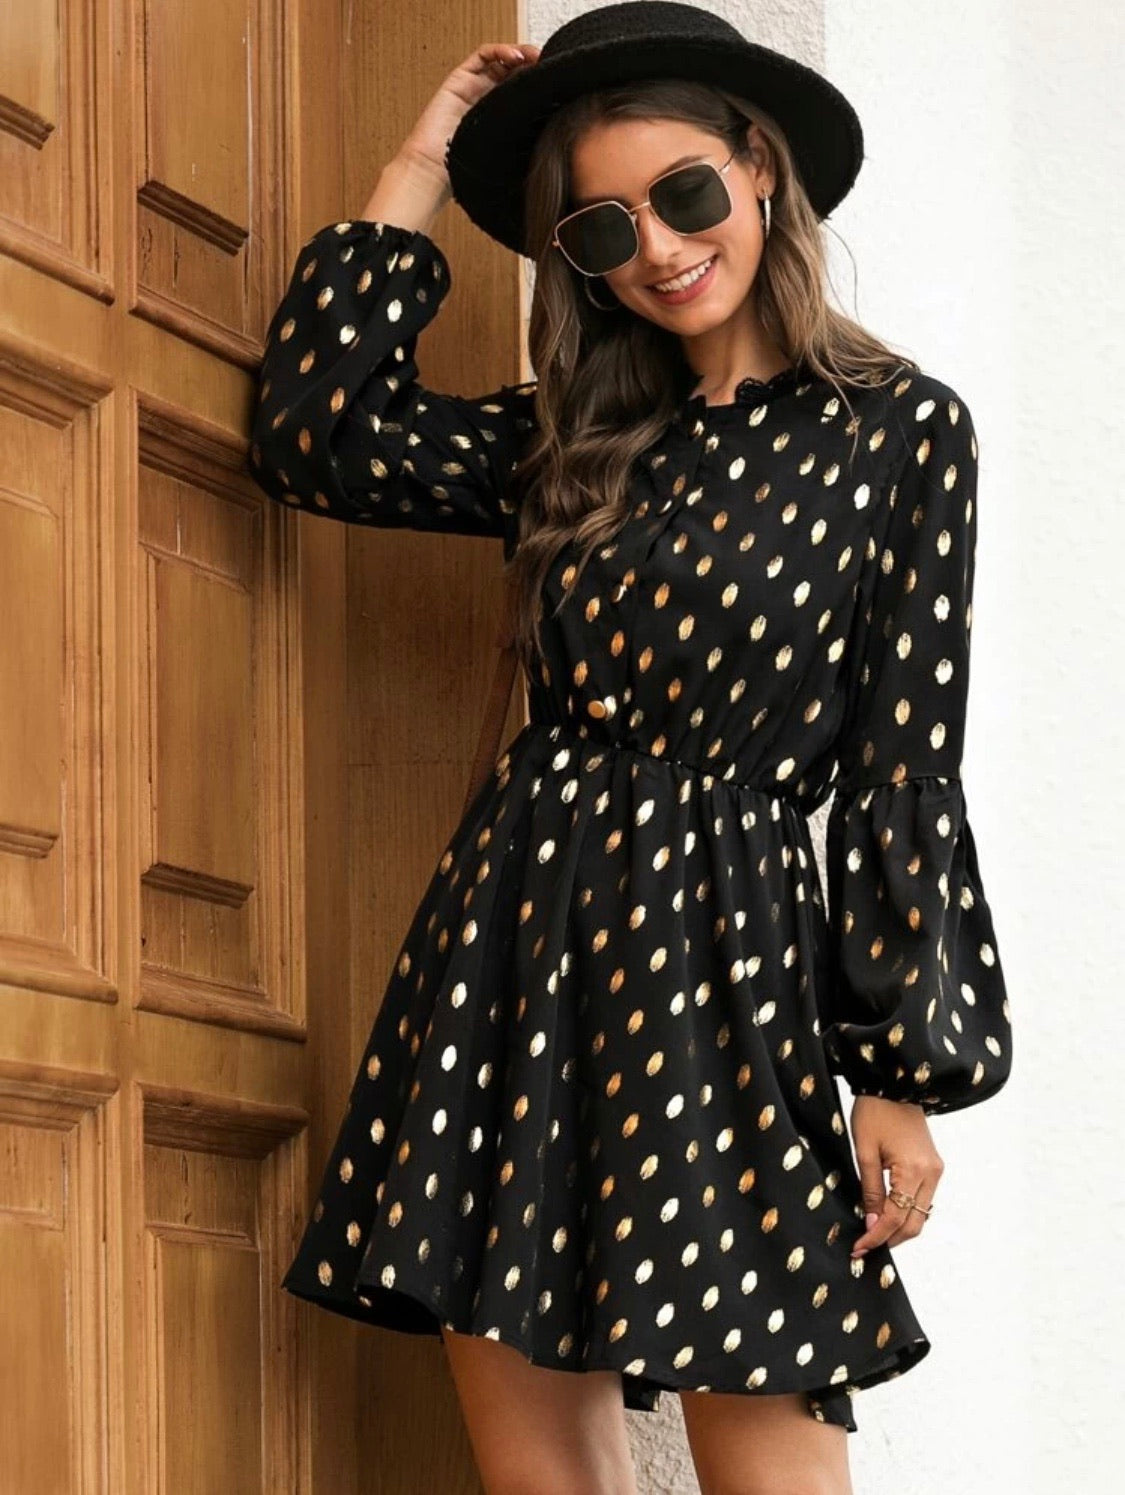 Non-stretch polka dot lace dress with contrasting lace detail.